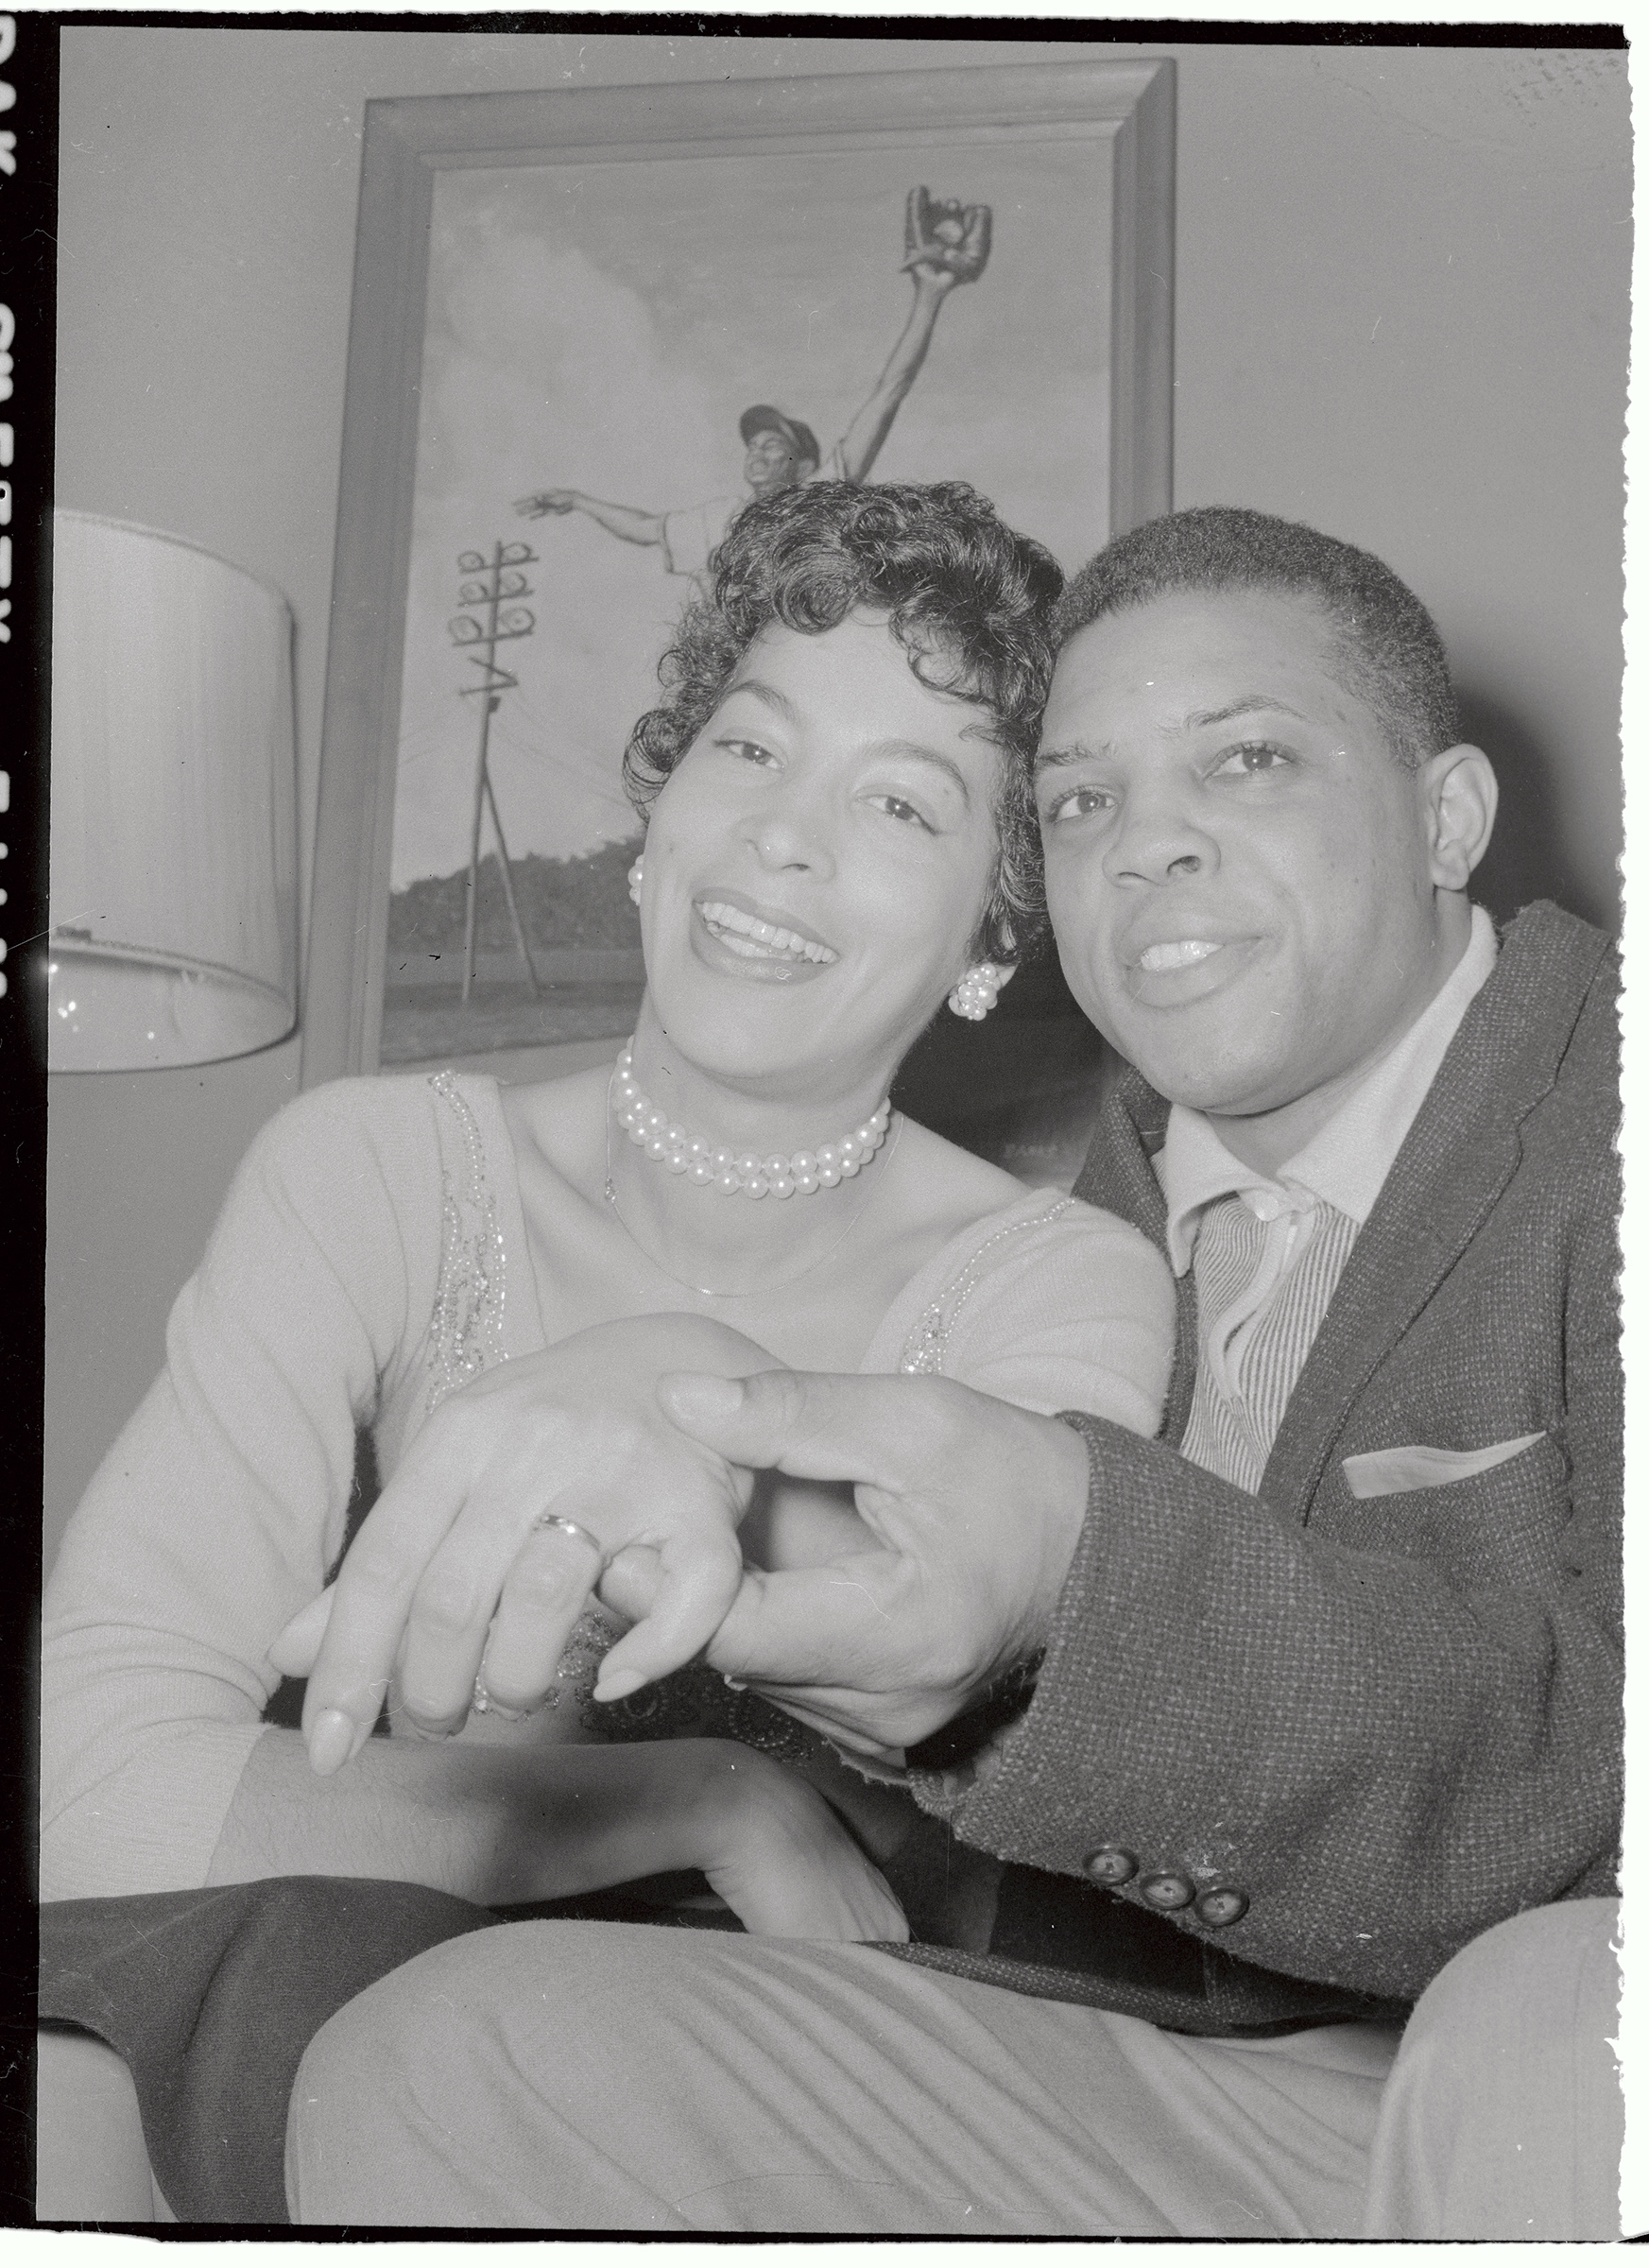 New York Giants star outfielder Willie Mays, 25, is shown with his bride of a few hours, Marguerite Wendelle, 27, at her home in Elmhurst, N.Y. after their wedding in Elkton, Md. on Feb. 14, 1956. En route to Elkton, Mays was arrested for driving 70 miles an hour on the New Jersey turnpike and paid a $15 fine. (Bettmann Archive/Getty Images)